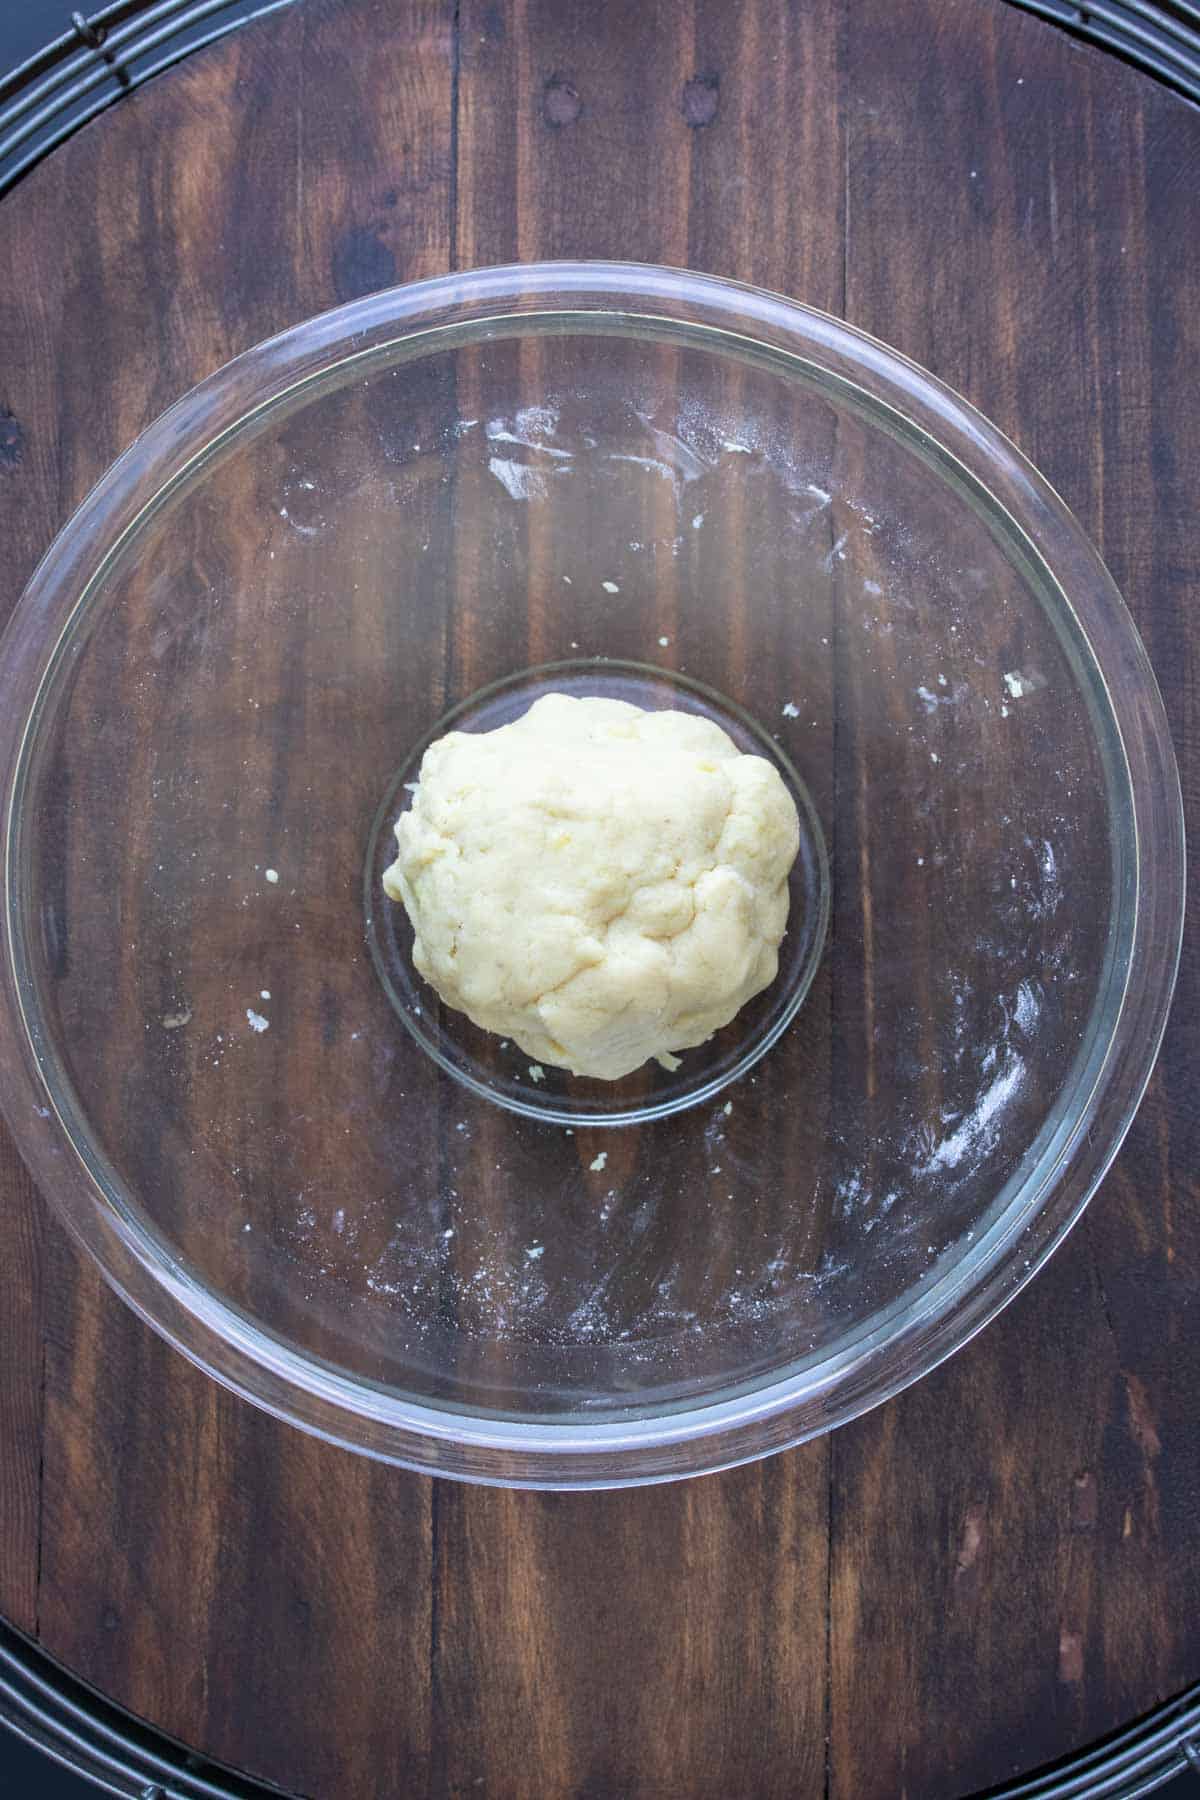 Glass bowl on a wooden surface with a ball of dough inside.